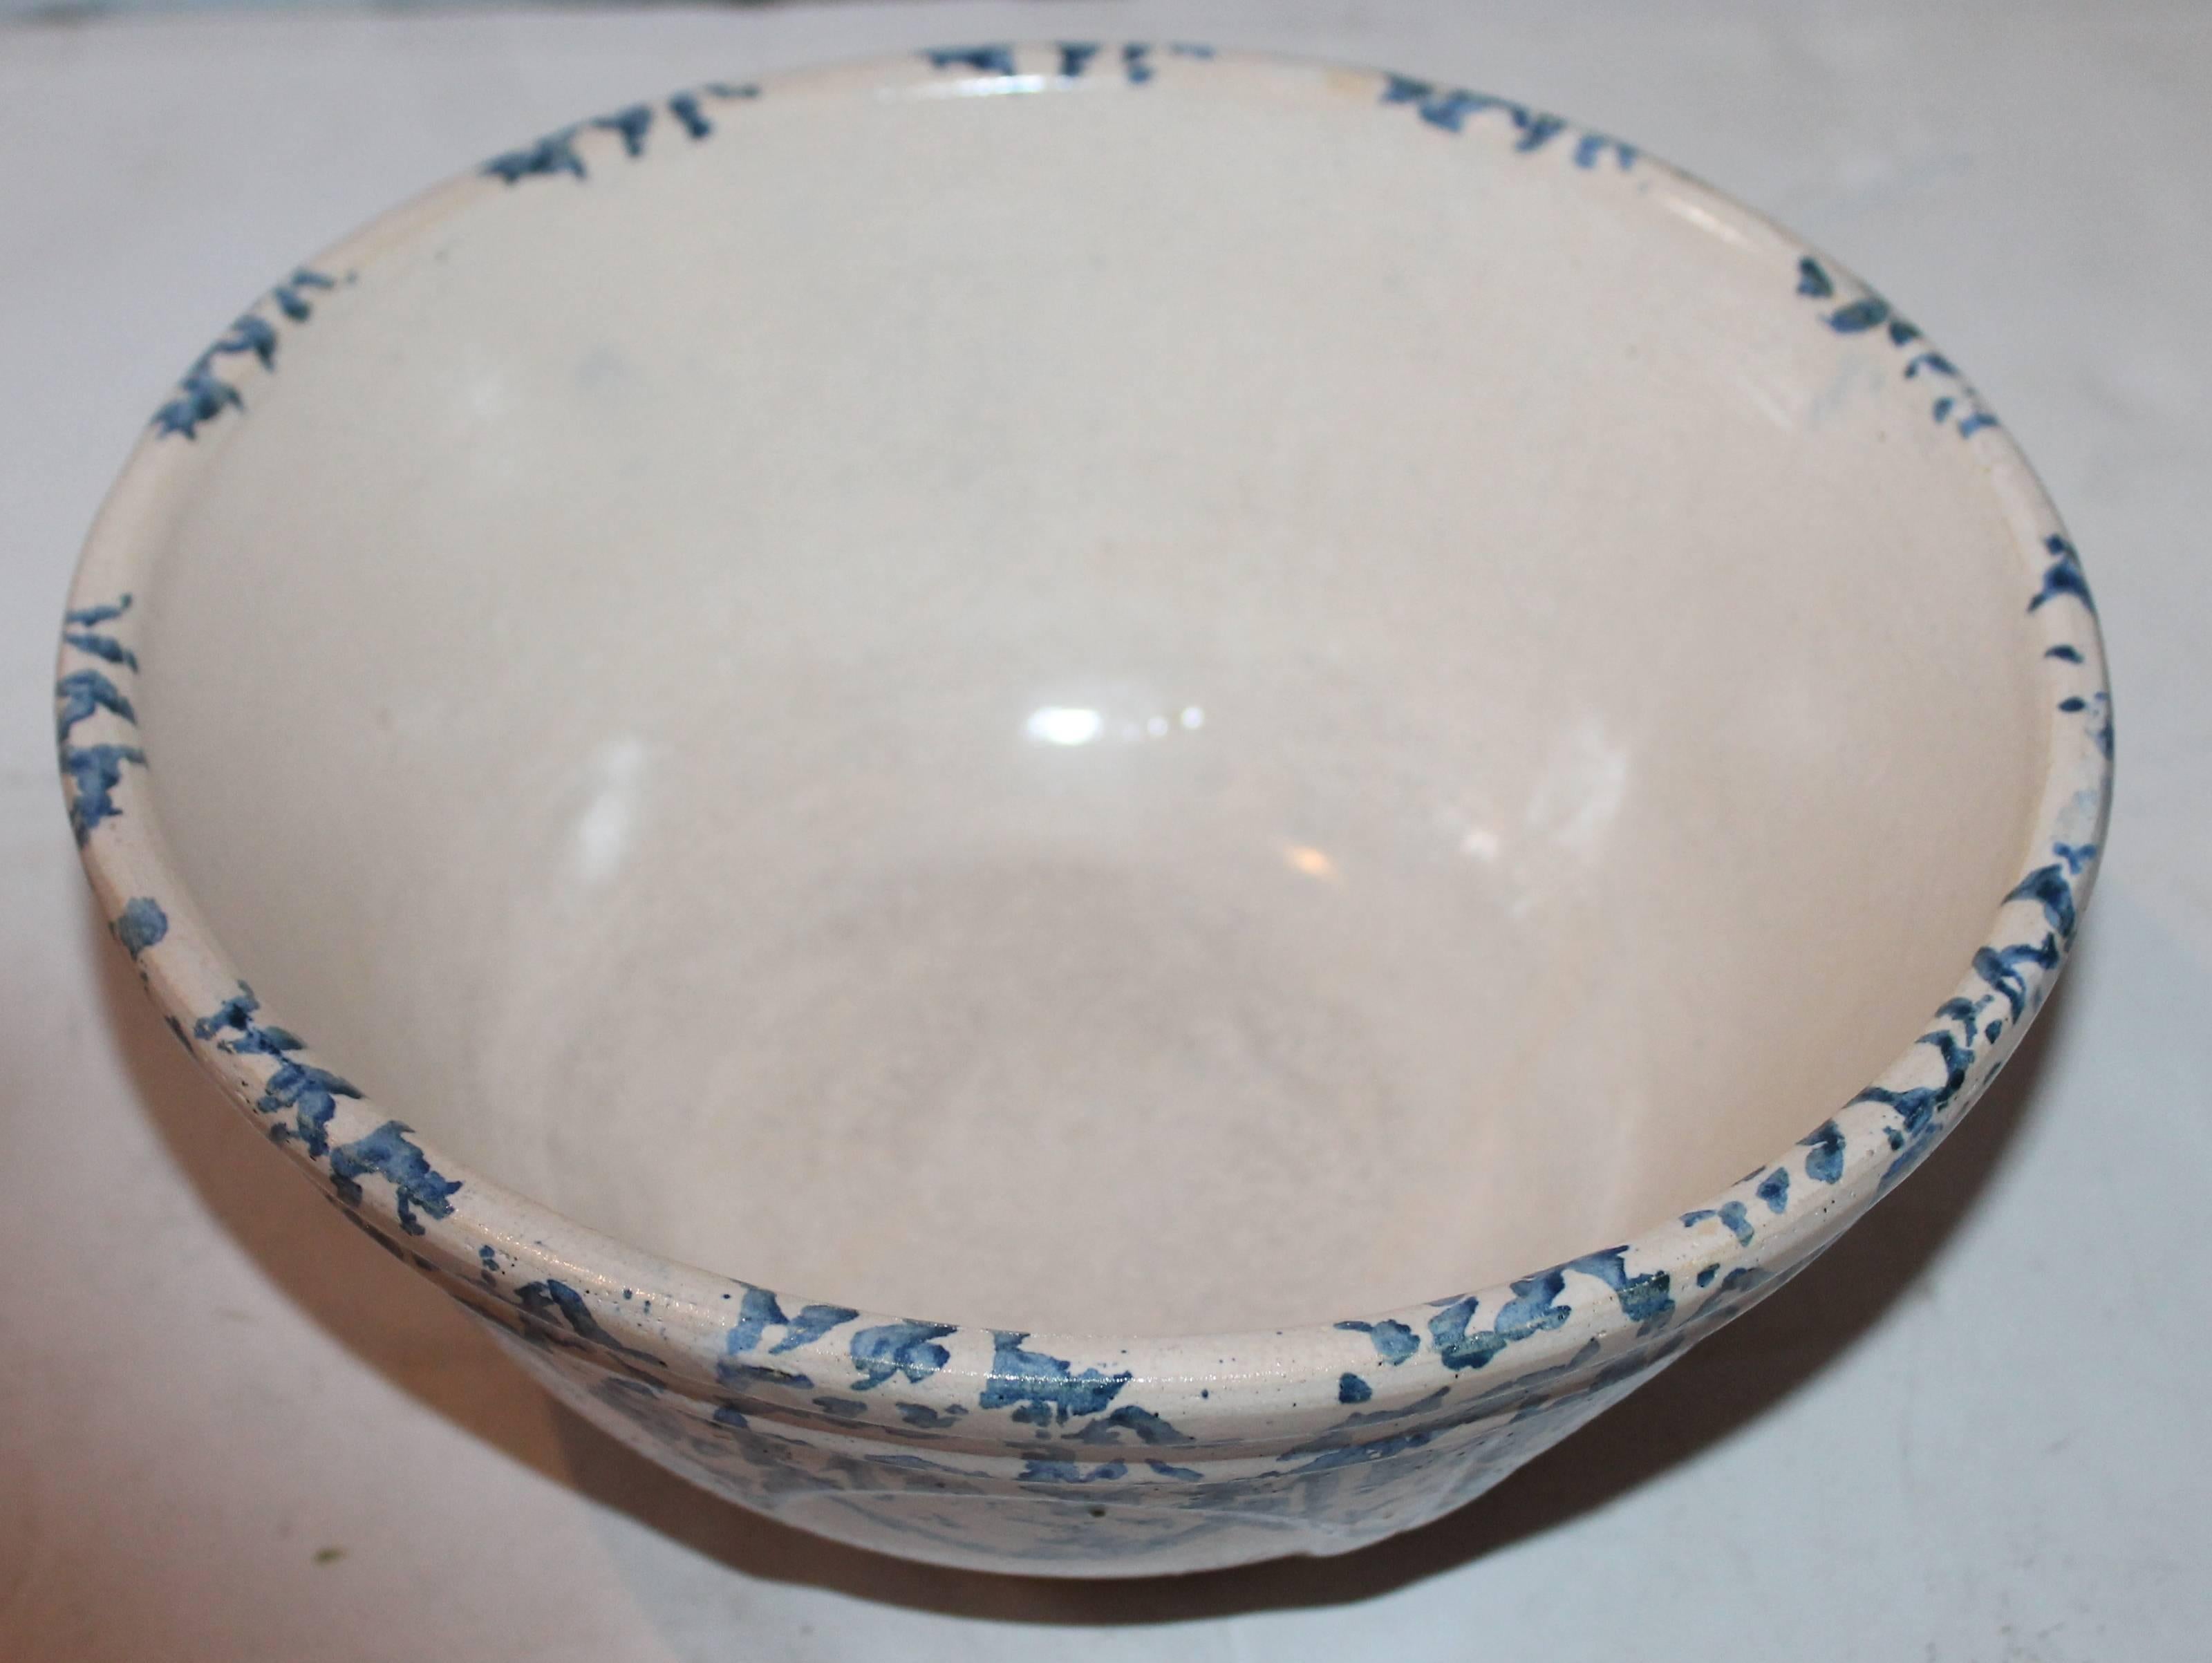 This is the medium size spongeware mixing bowl. It is the design sponge clam shell pattern. The condition is mint.